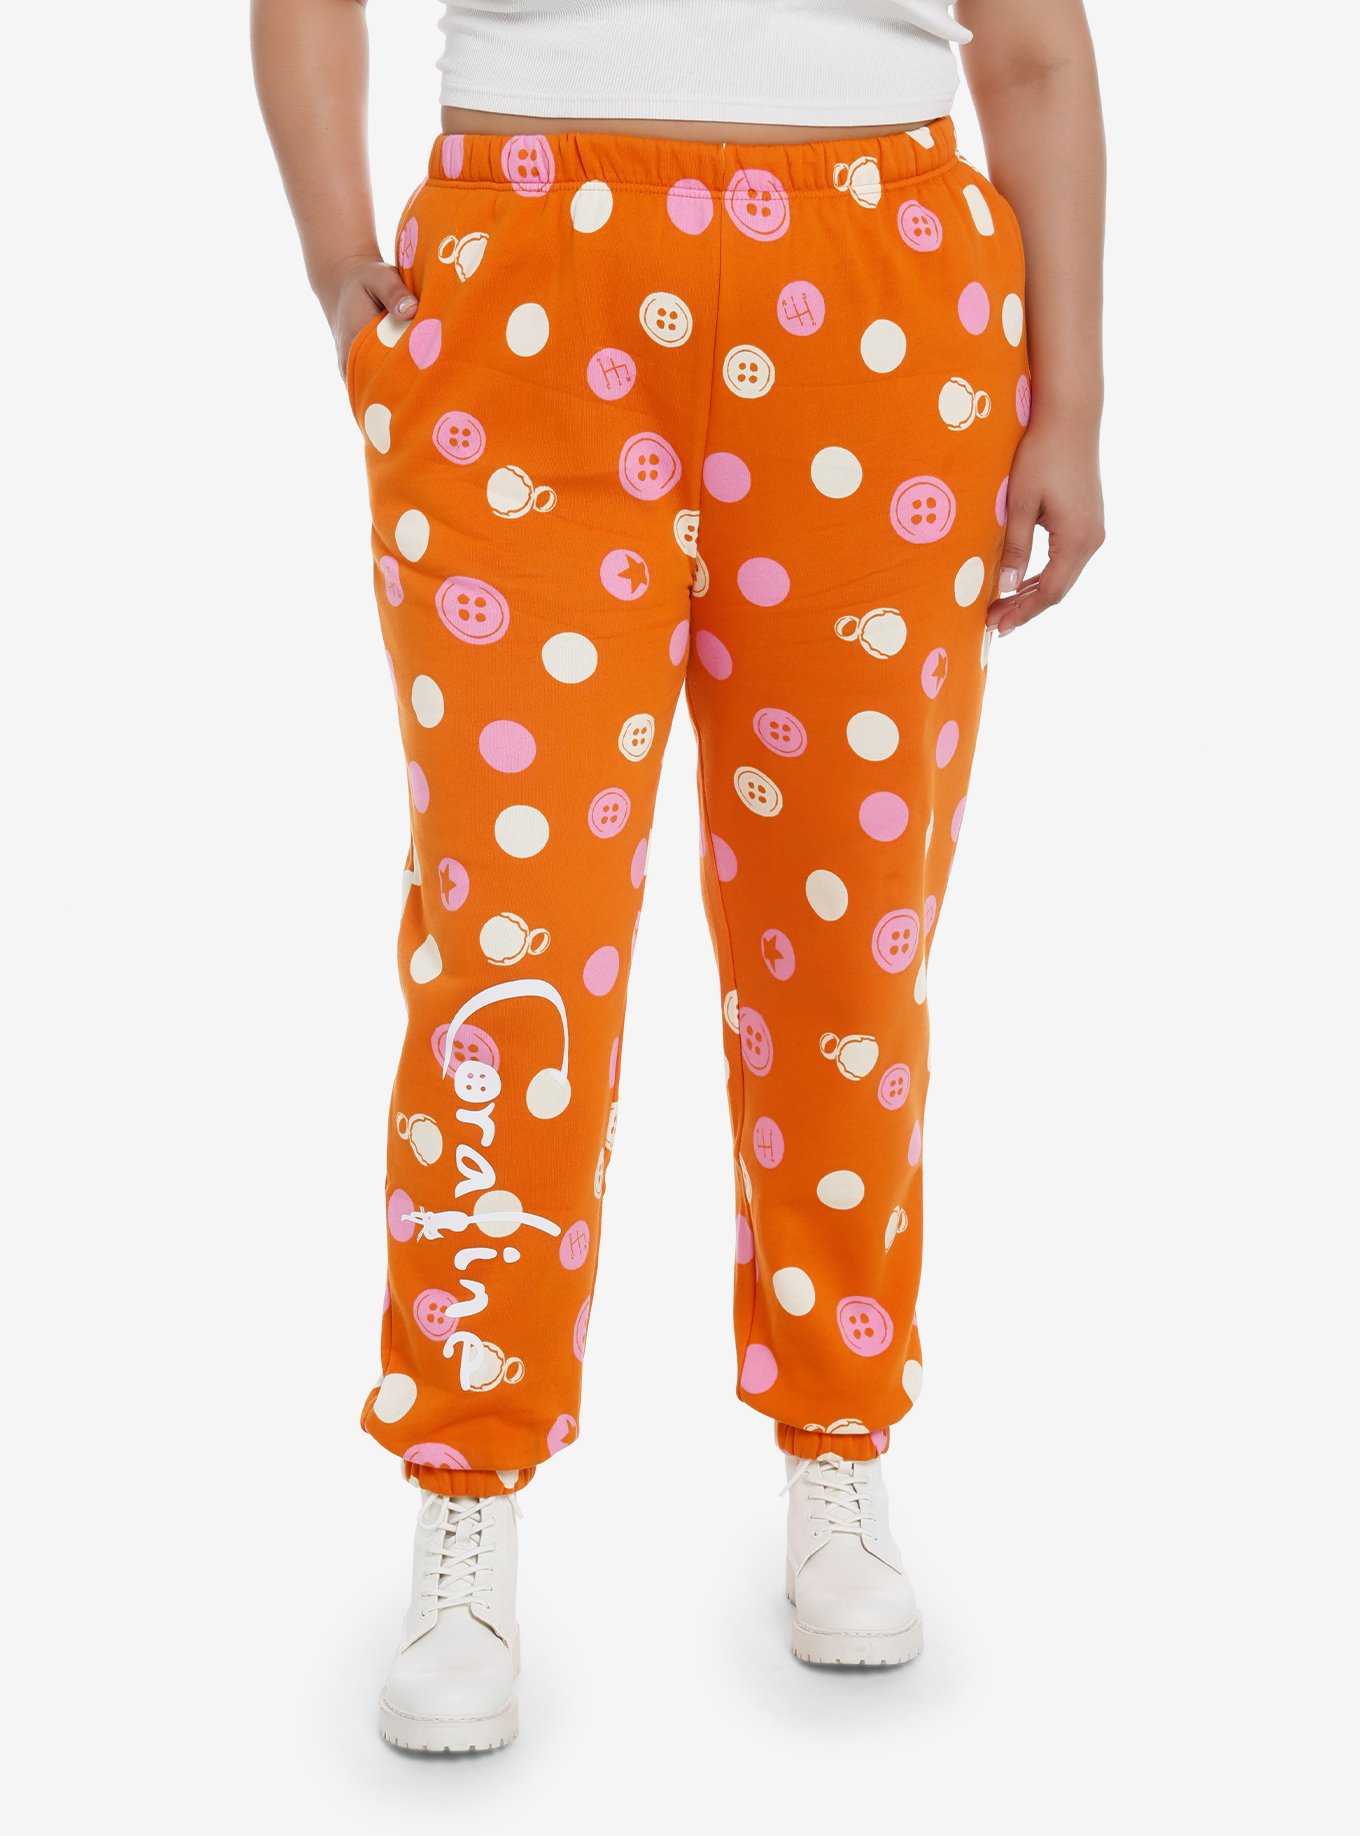 Hot Topic Social Collision Final Girl Icons Girls Sweatpants Plus